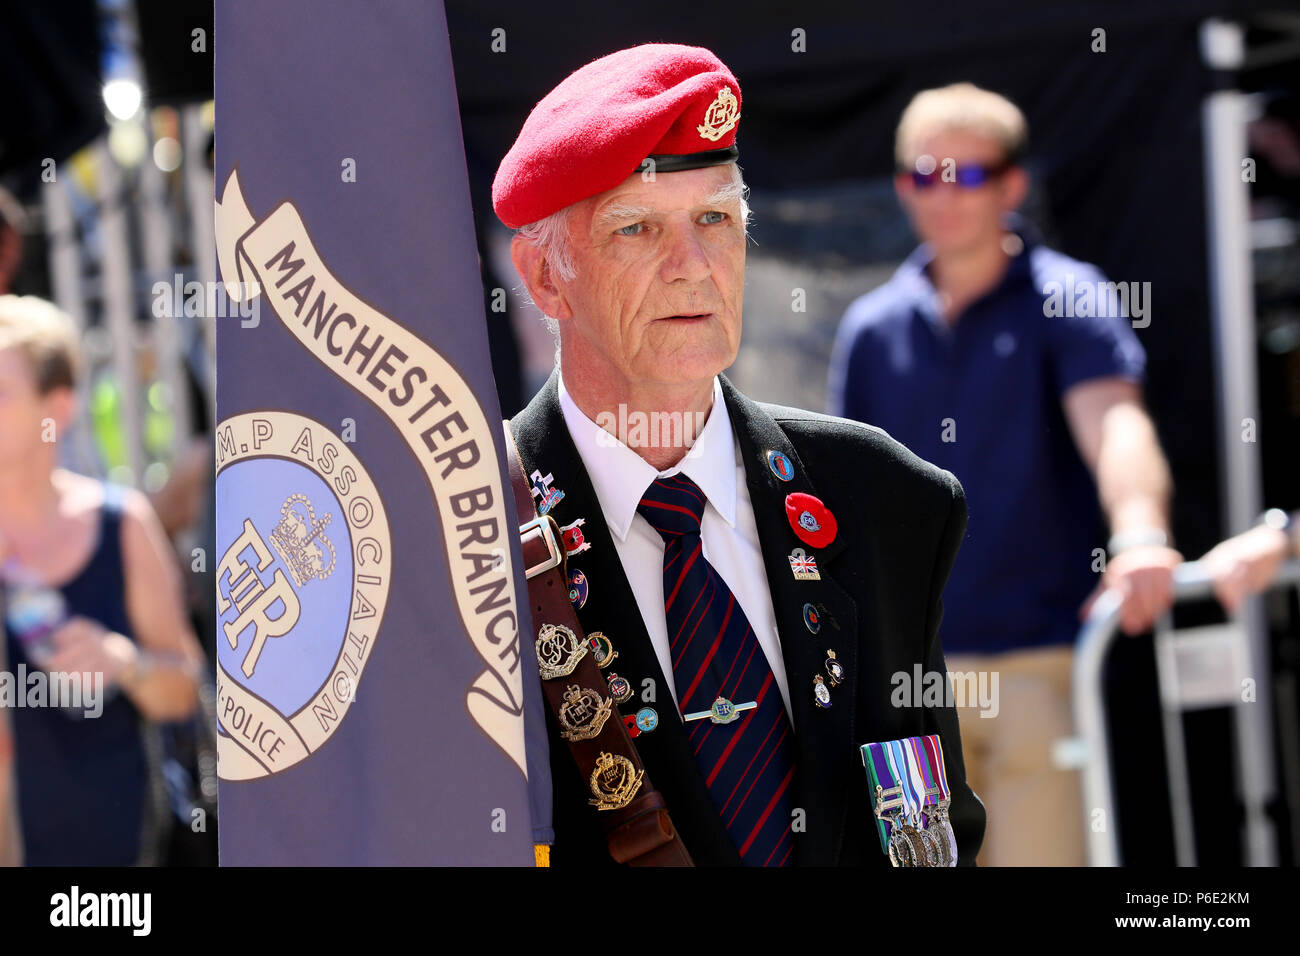 Manchester, UK, 30 June 2018. A Manchester branch veteran during celebrations of Armed Forces Day where the public are given the opportunity to meet members of the armed forces and talk to them about the work they do, St Peters Square, Manchester, 30th June, 2018 (C)Barbara Cook/Alamy Live News Stock Photo